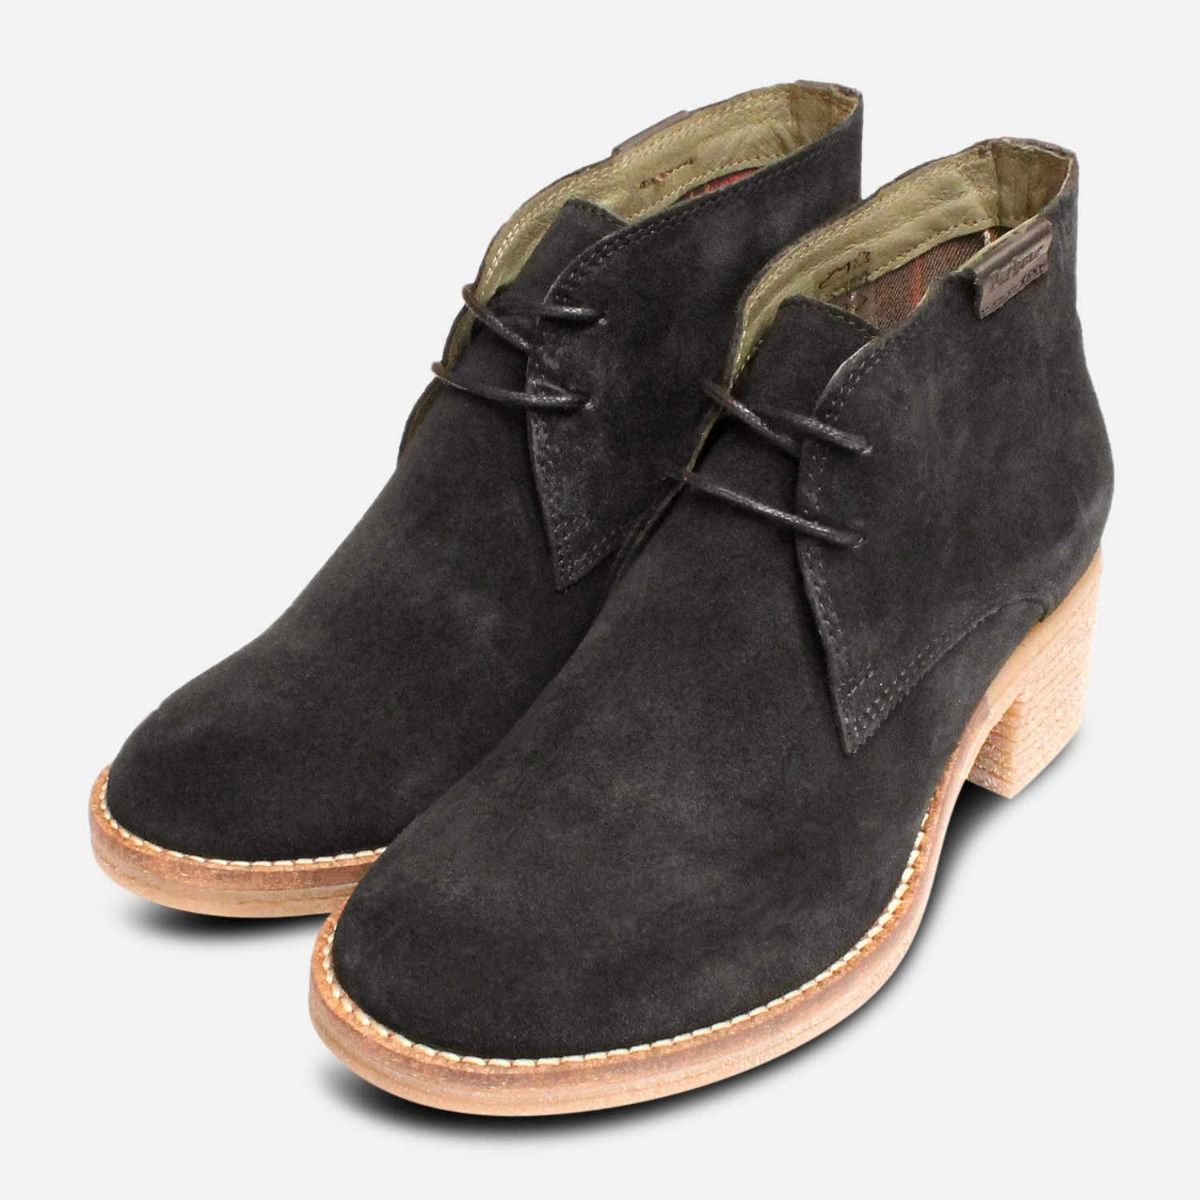 Barbour Edele III Black Suede Lace Up 